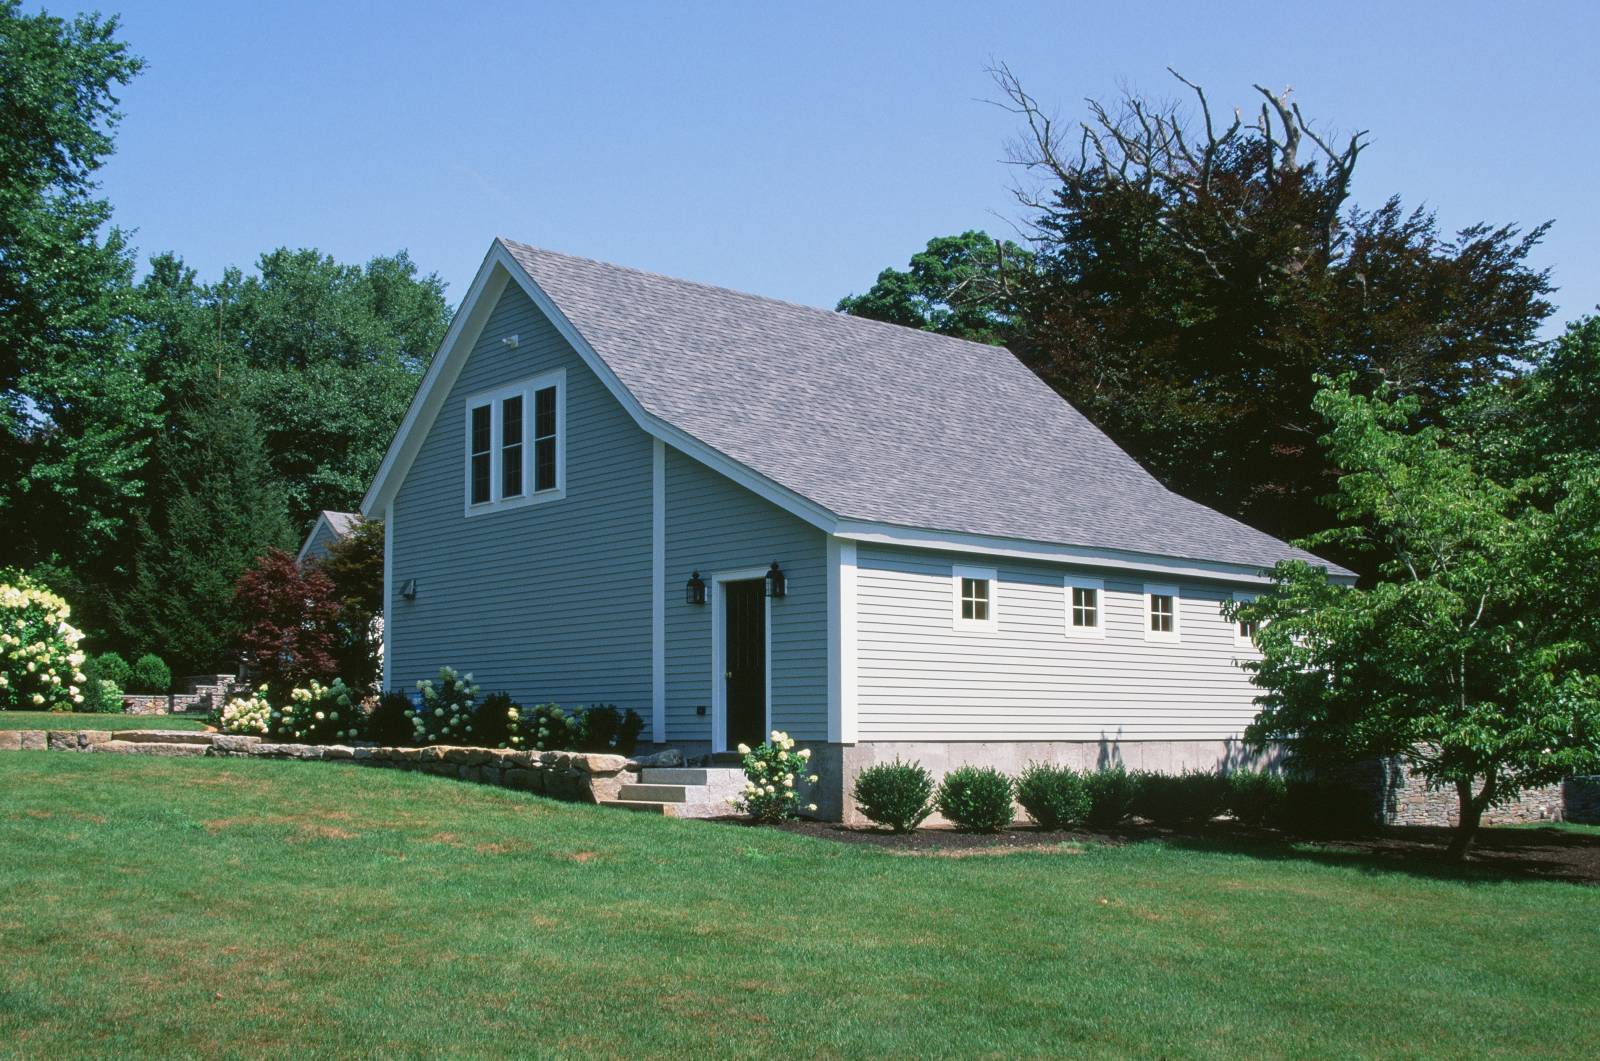 Barn Painted Light Gray-Blue with White Trim & Black Doors to Match the House • 10' Enclosed Lean-To with 4 Square Windows • Entry Door